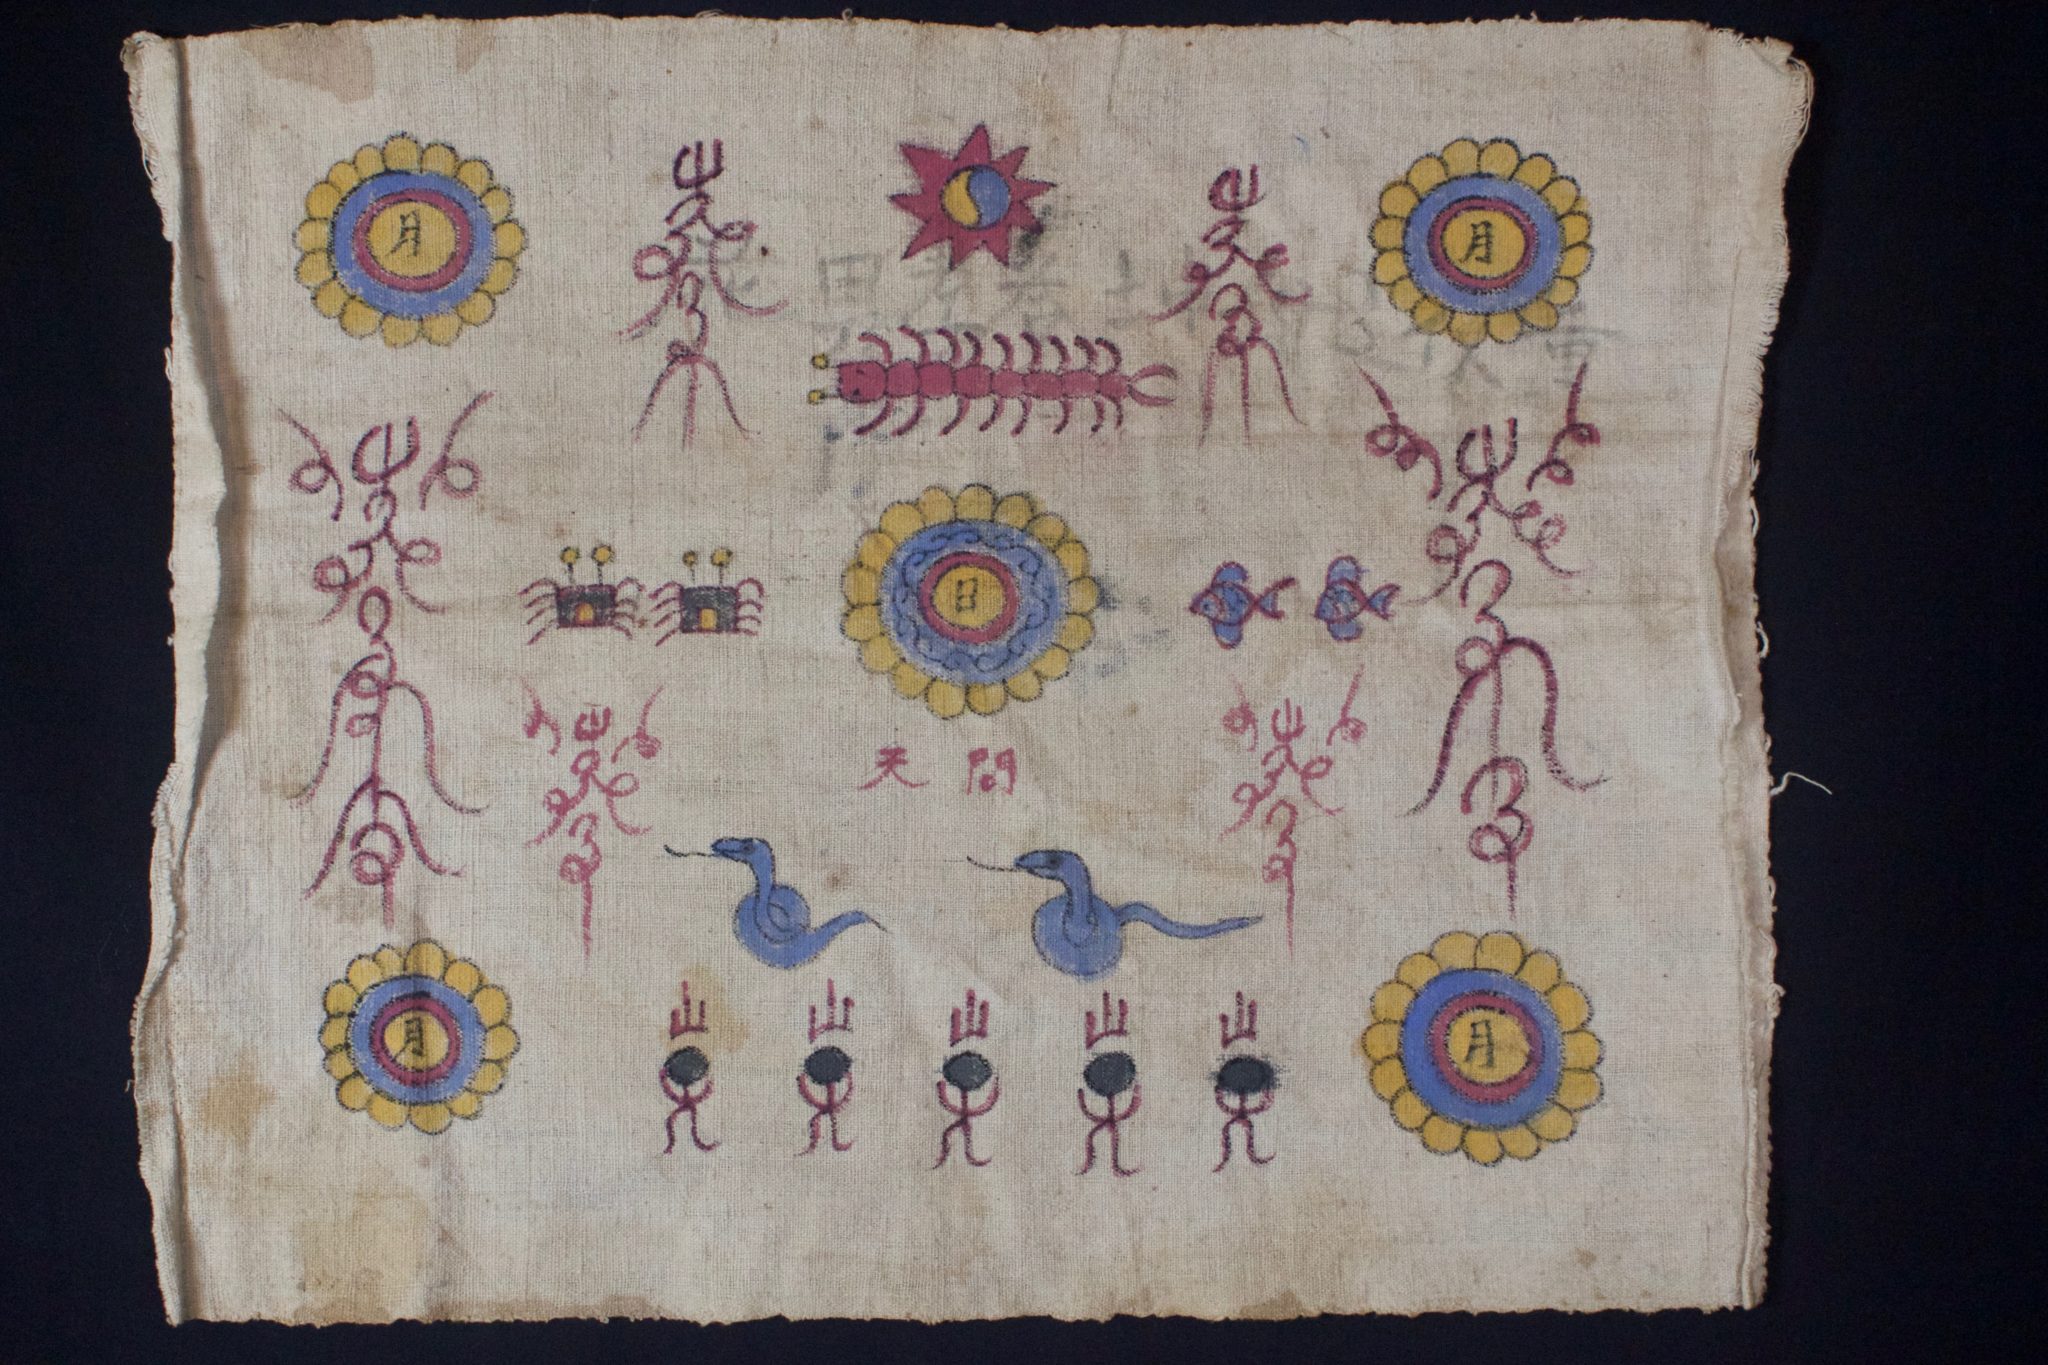 Shaman Cloth Vietnam Yao people Early 20th c. Cotton with pigment Ritual use 13” x 14” $190